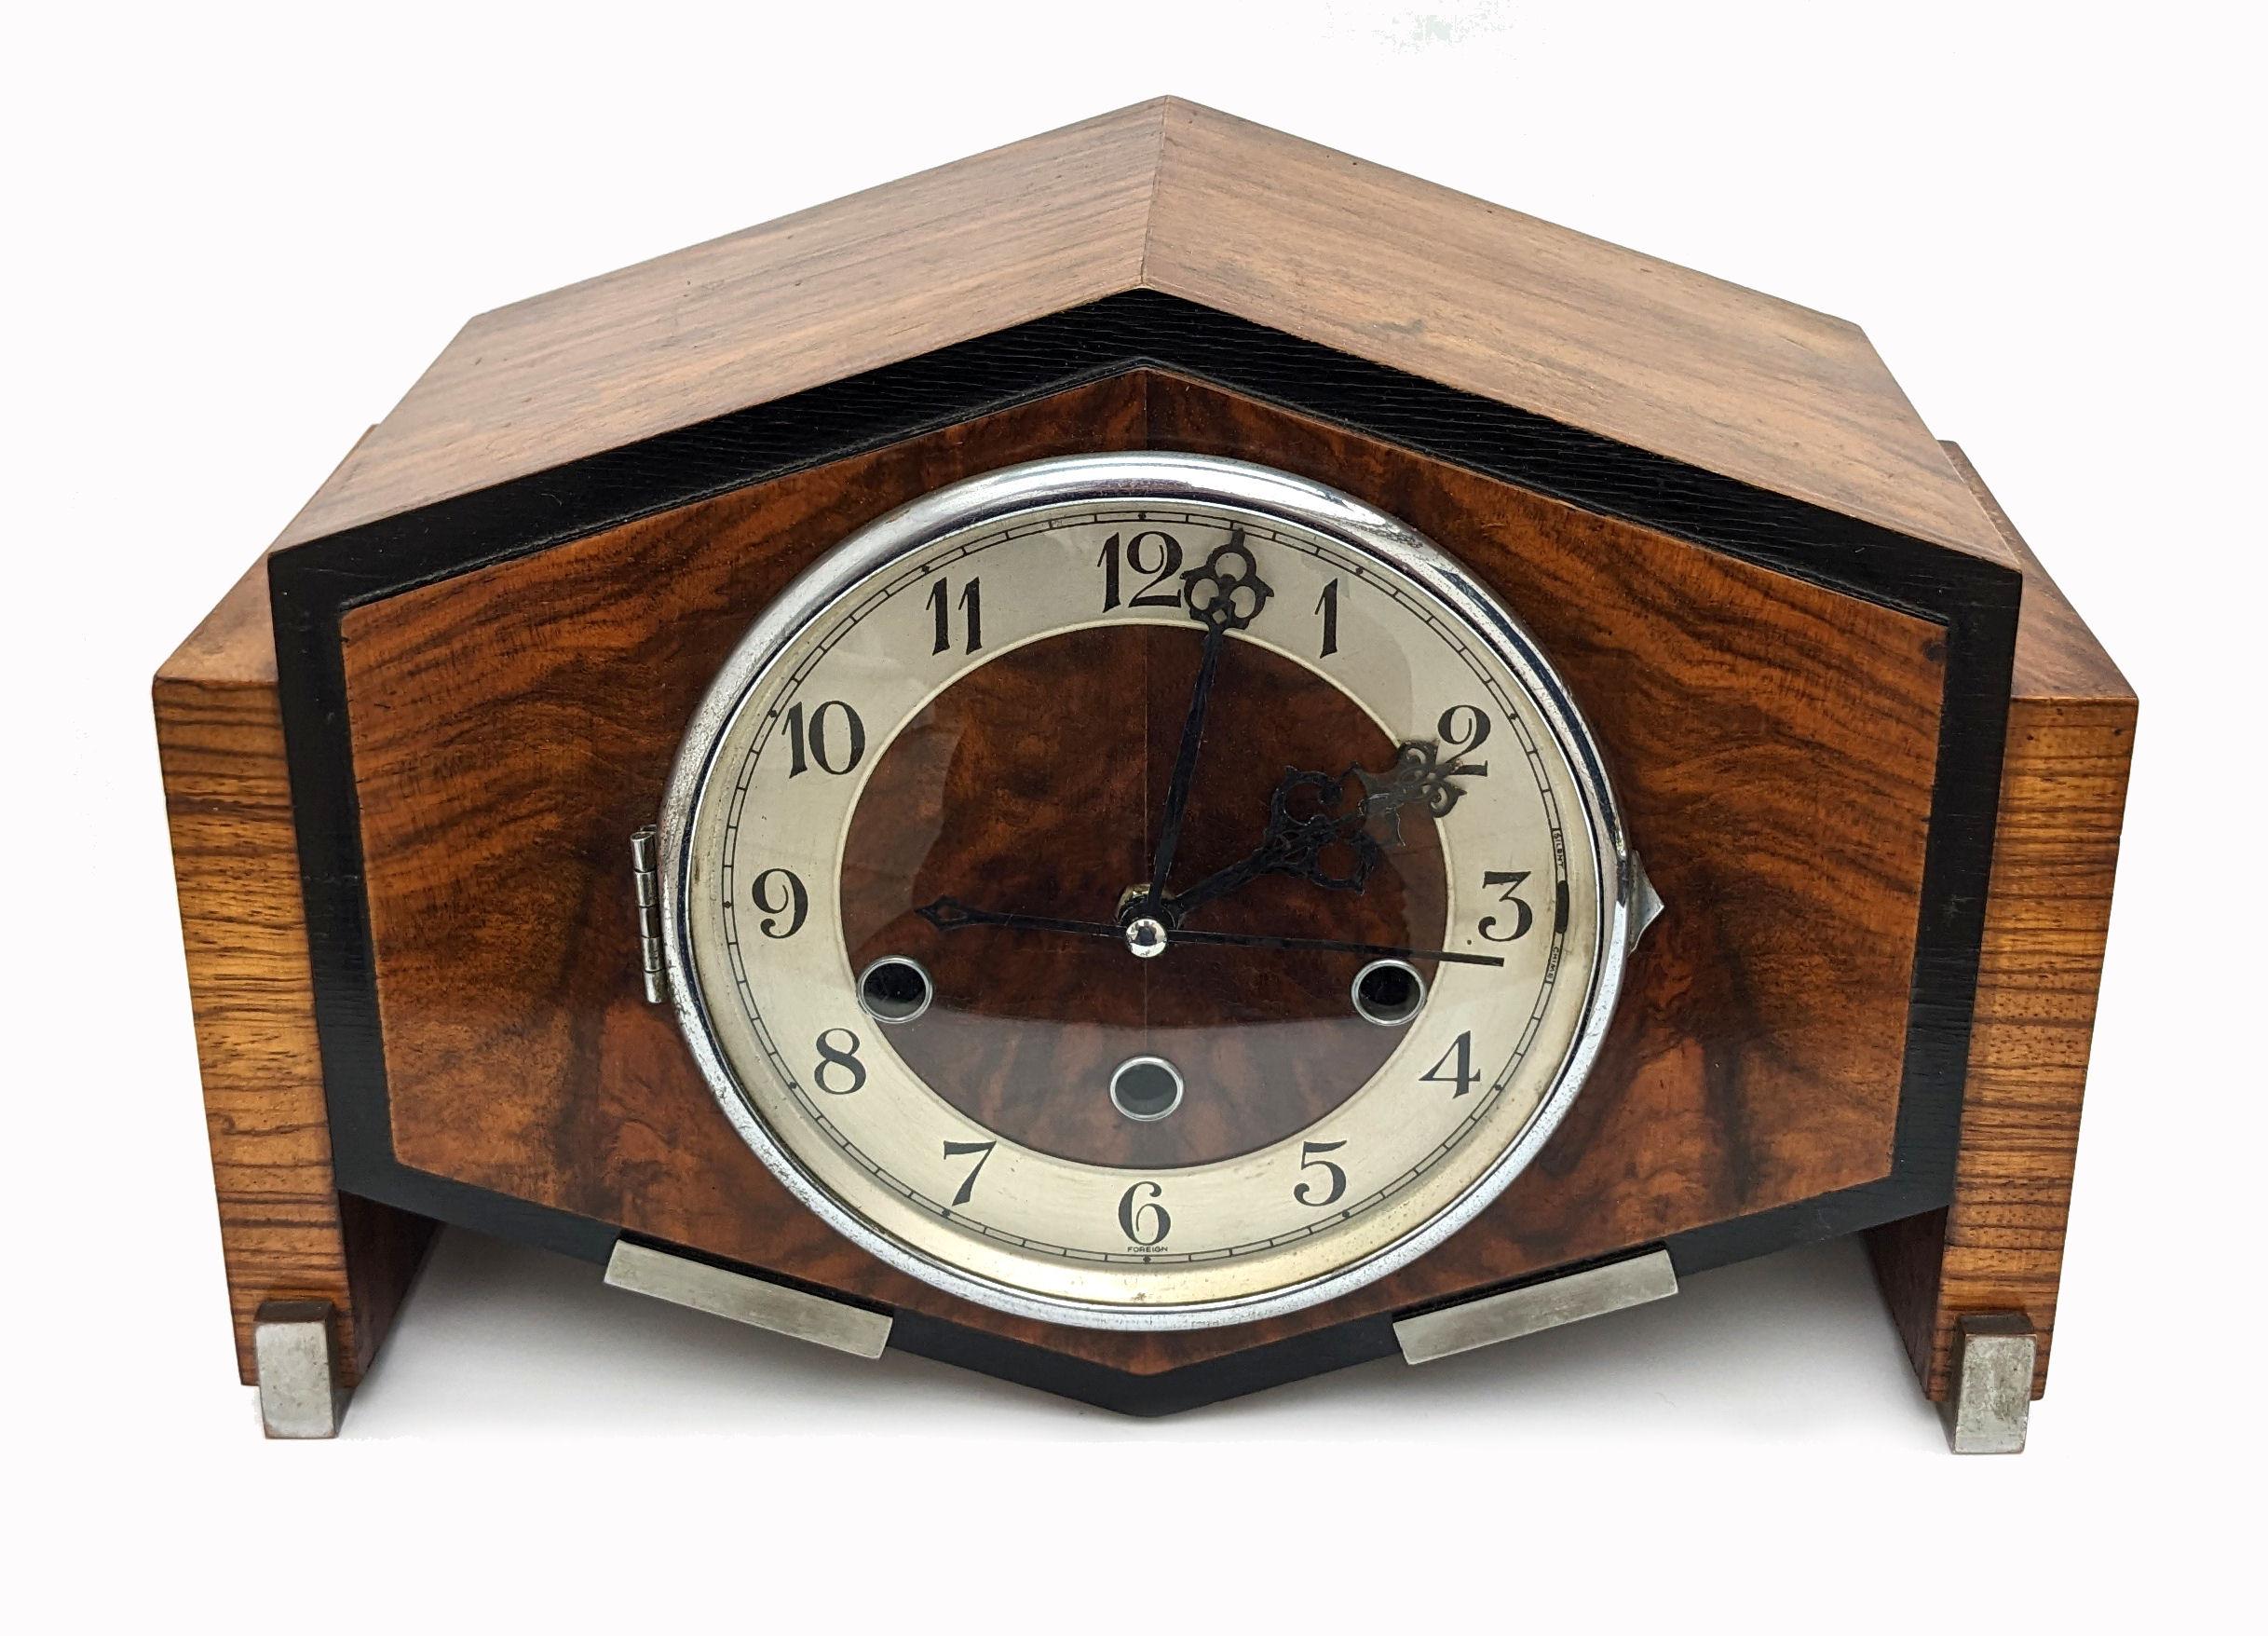 For your consideration is this very stylish 1930's Art Deco mantle clock made in England. A great angular shape and made from Walnut with chrome accents really sets this clock off perfectly. The movement which was wind up with a pendulum  has been